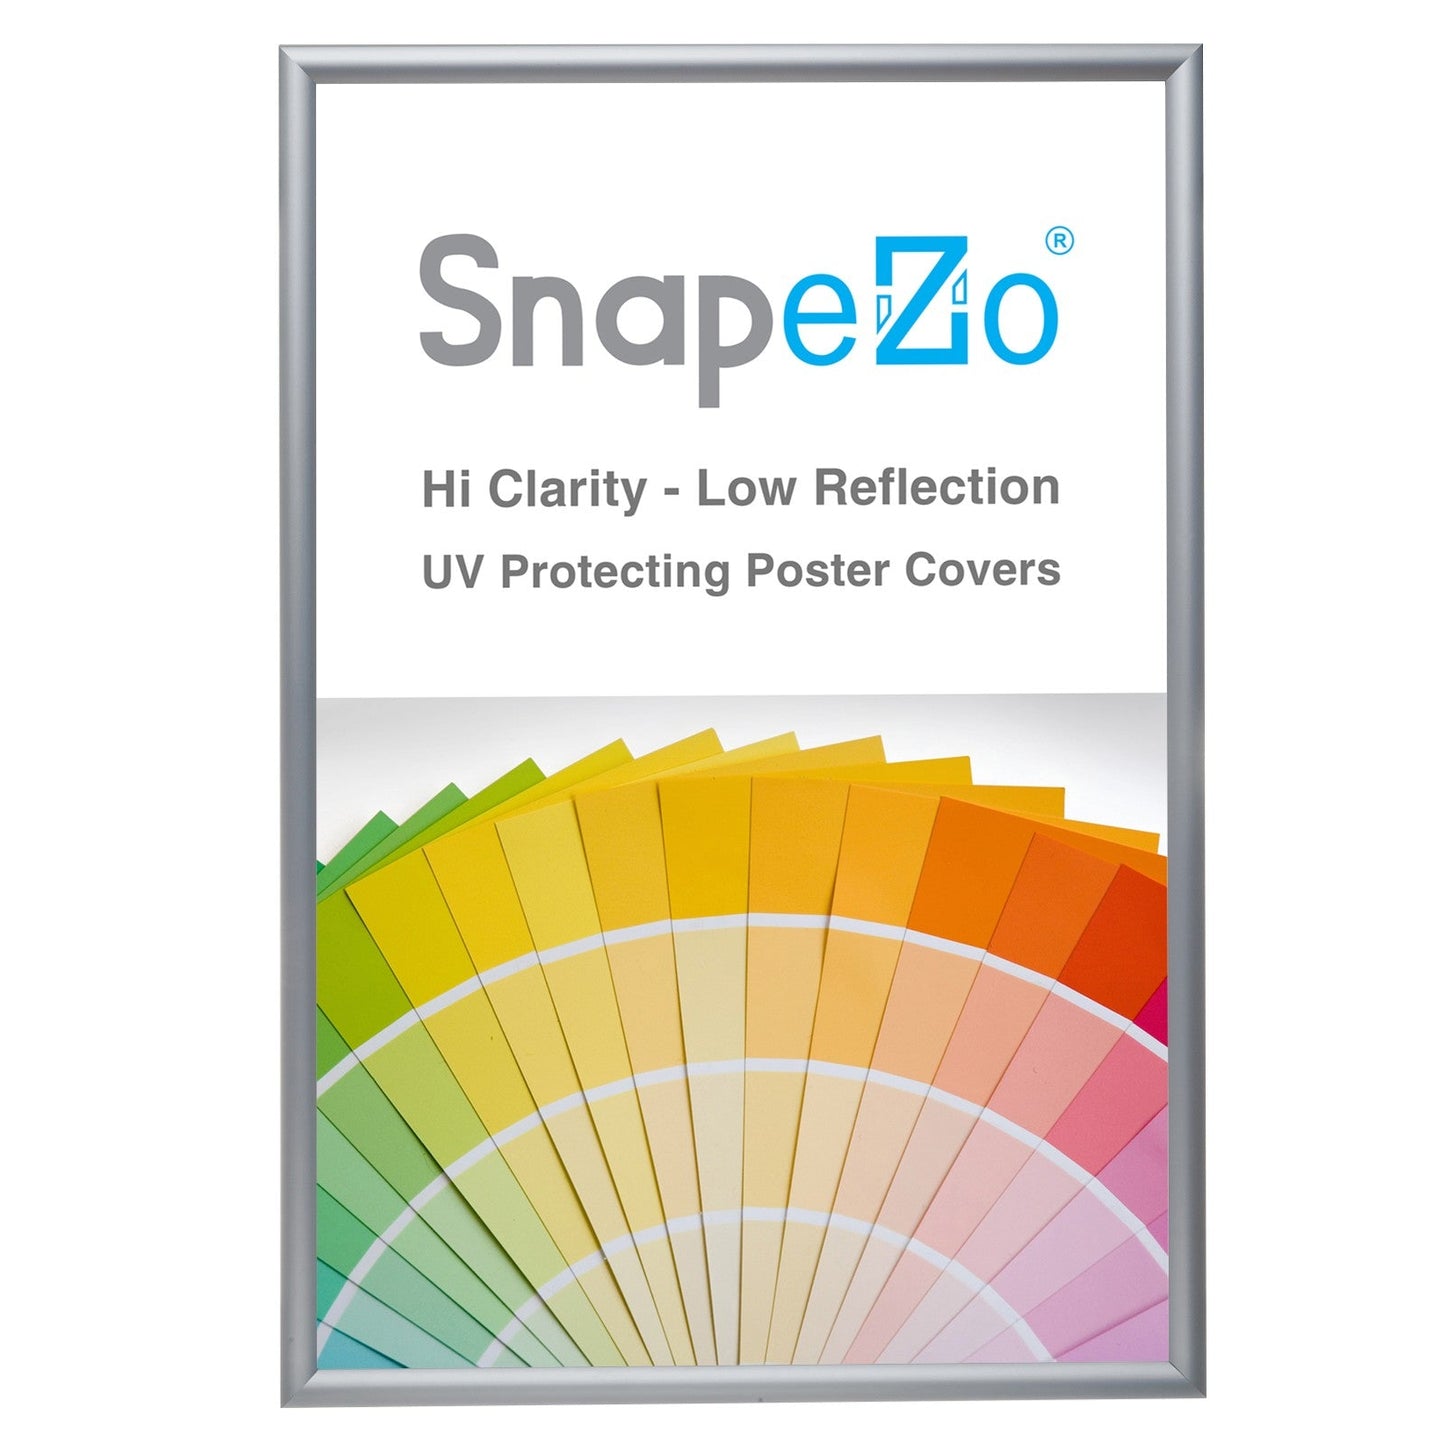 Load image into Gallery viewer, 28x42 Silver SnapeZo® Snap Frame - 1.2&amp;quot; Profile
